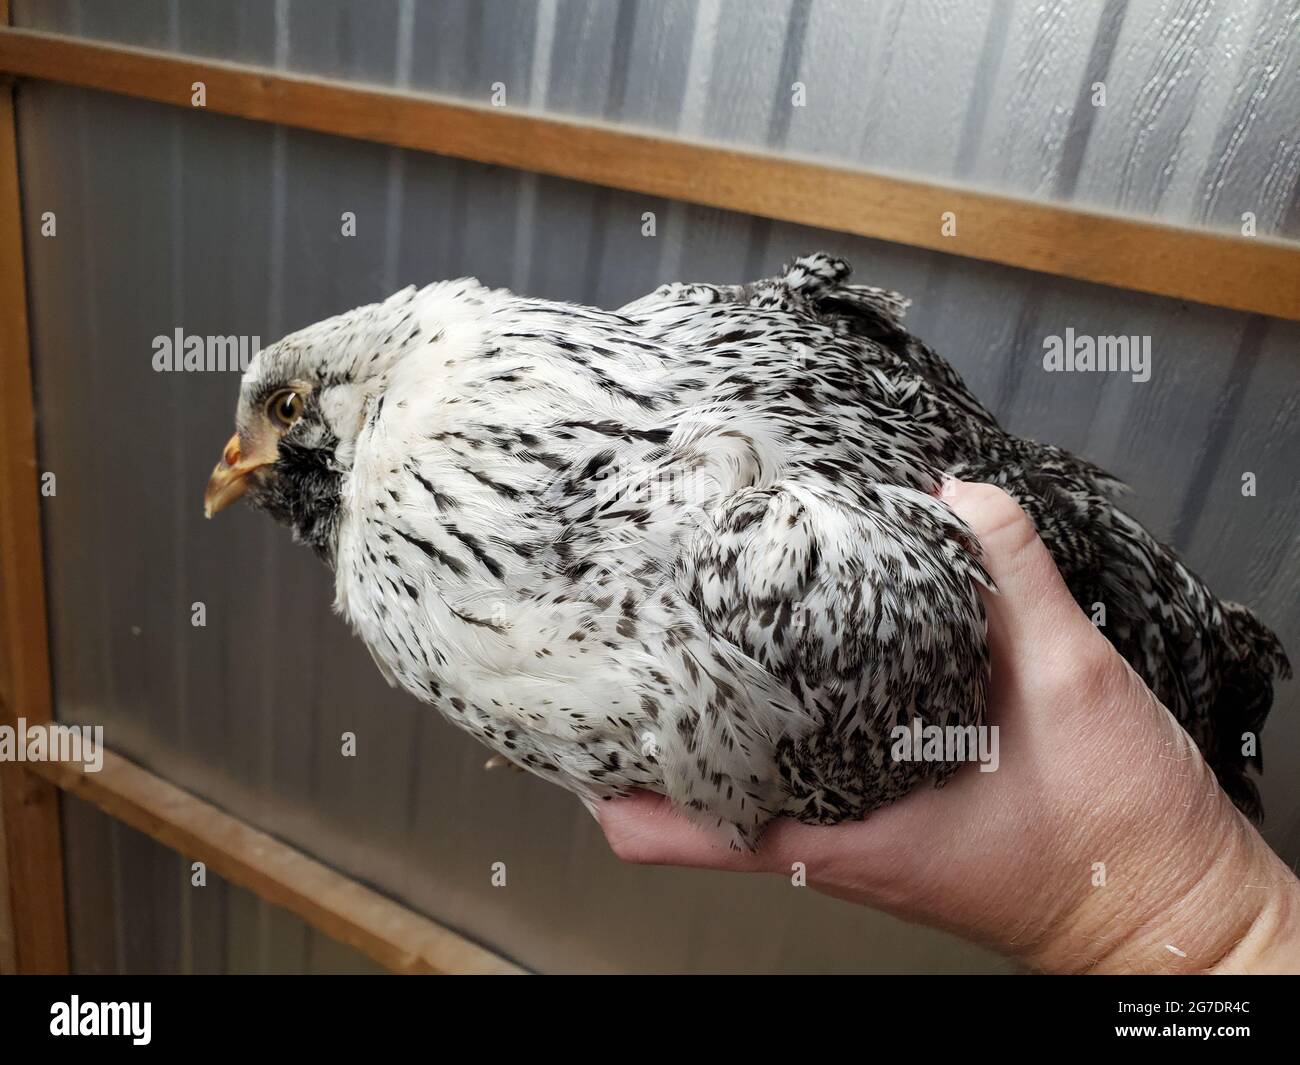 Person holding a spotted chicken in Lafayette, California, April 22, 2021. () Stock Photo